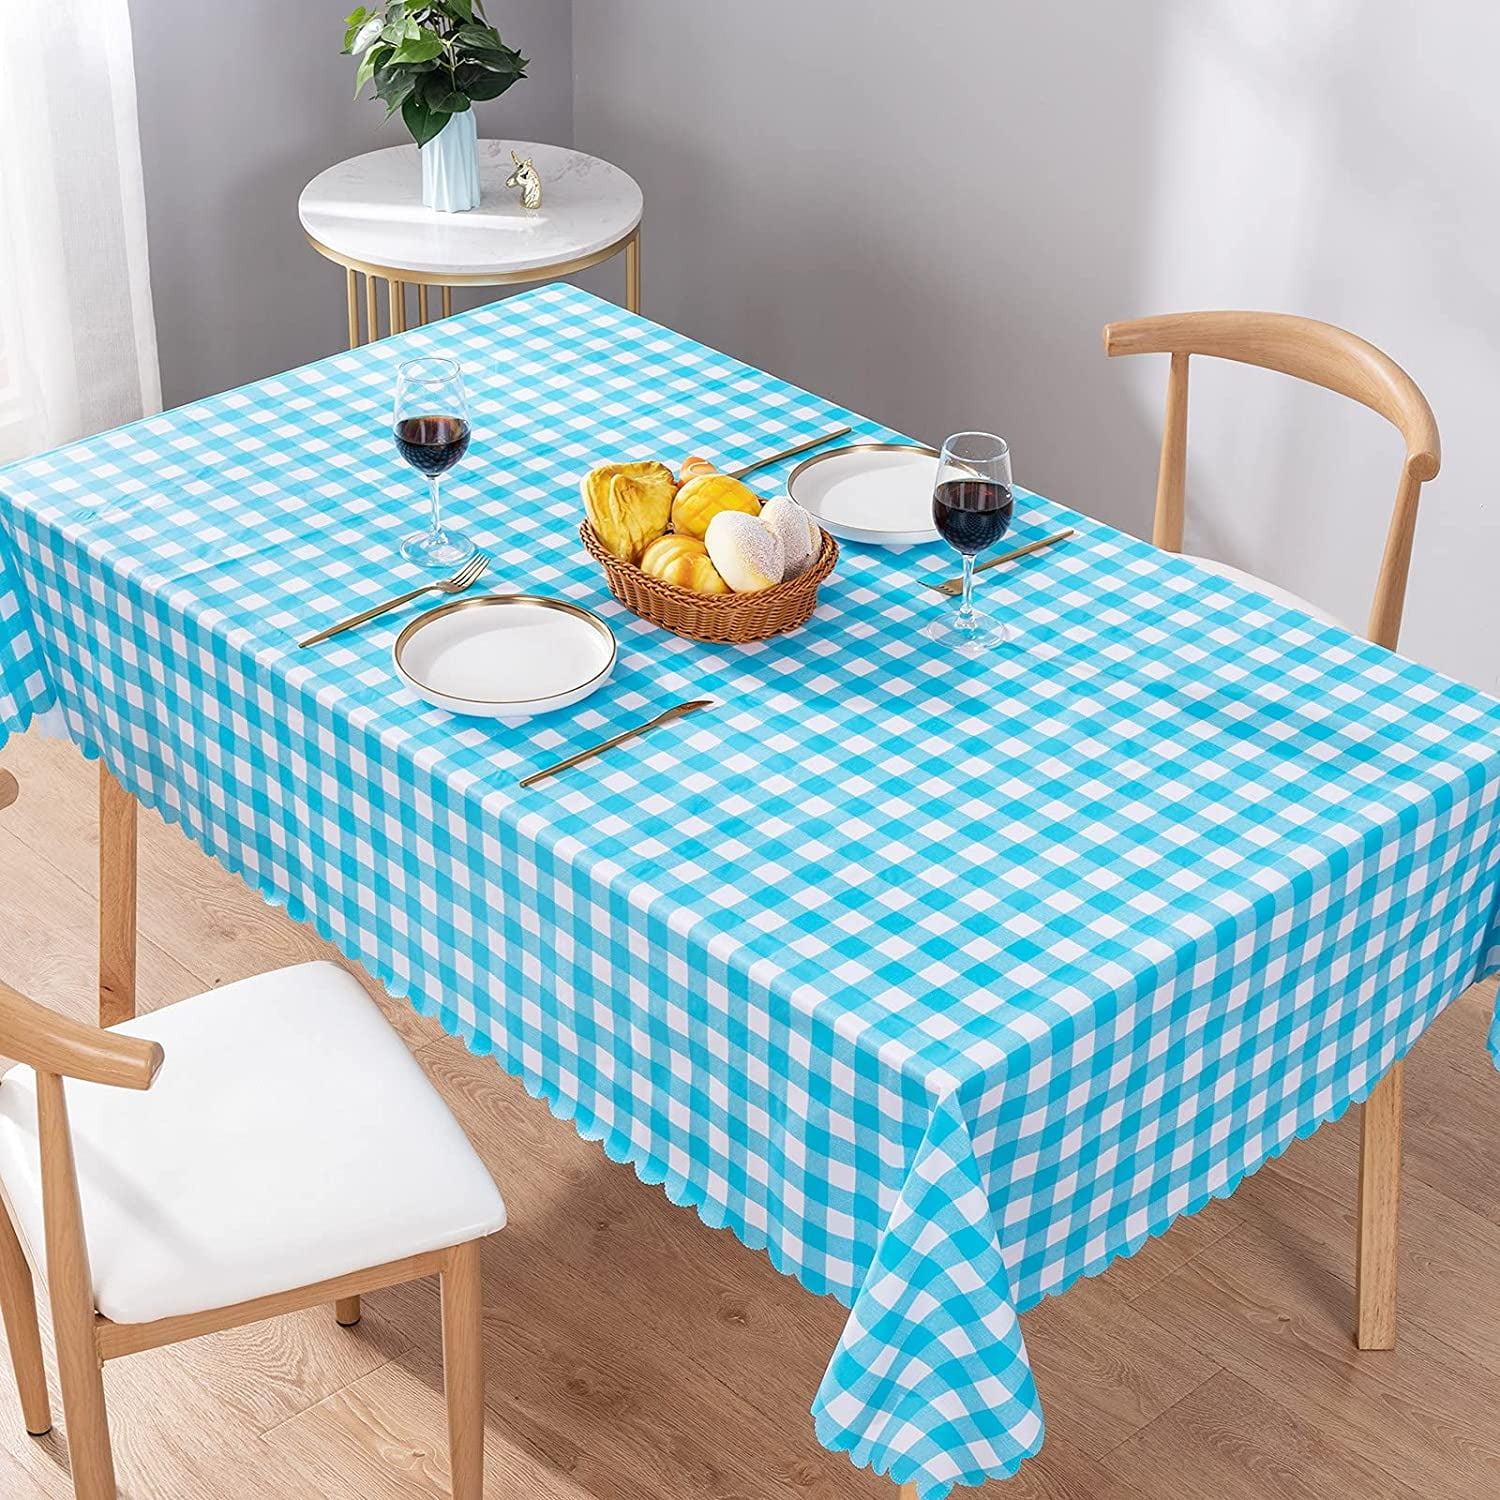 ZYBW Simple Modern Cotton Tassel Checkered Tablecloths Tablecloths for  Wedding,Dining Room,Rectangle (39x63 inch,Blue)